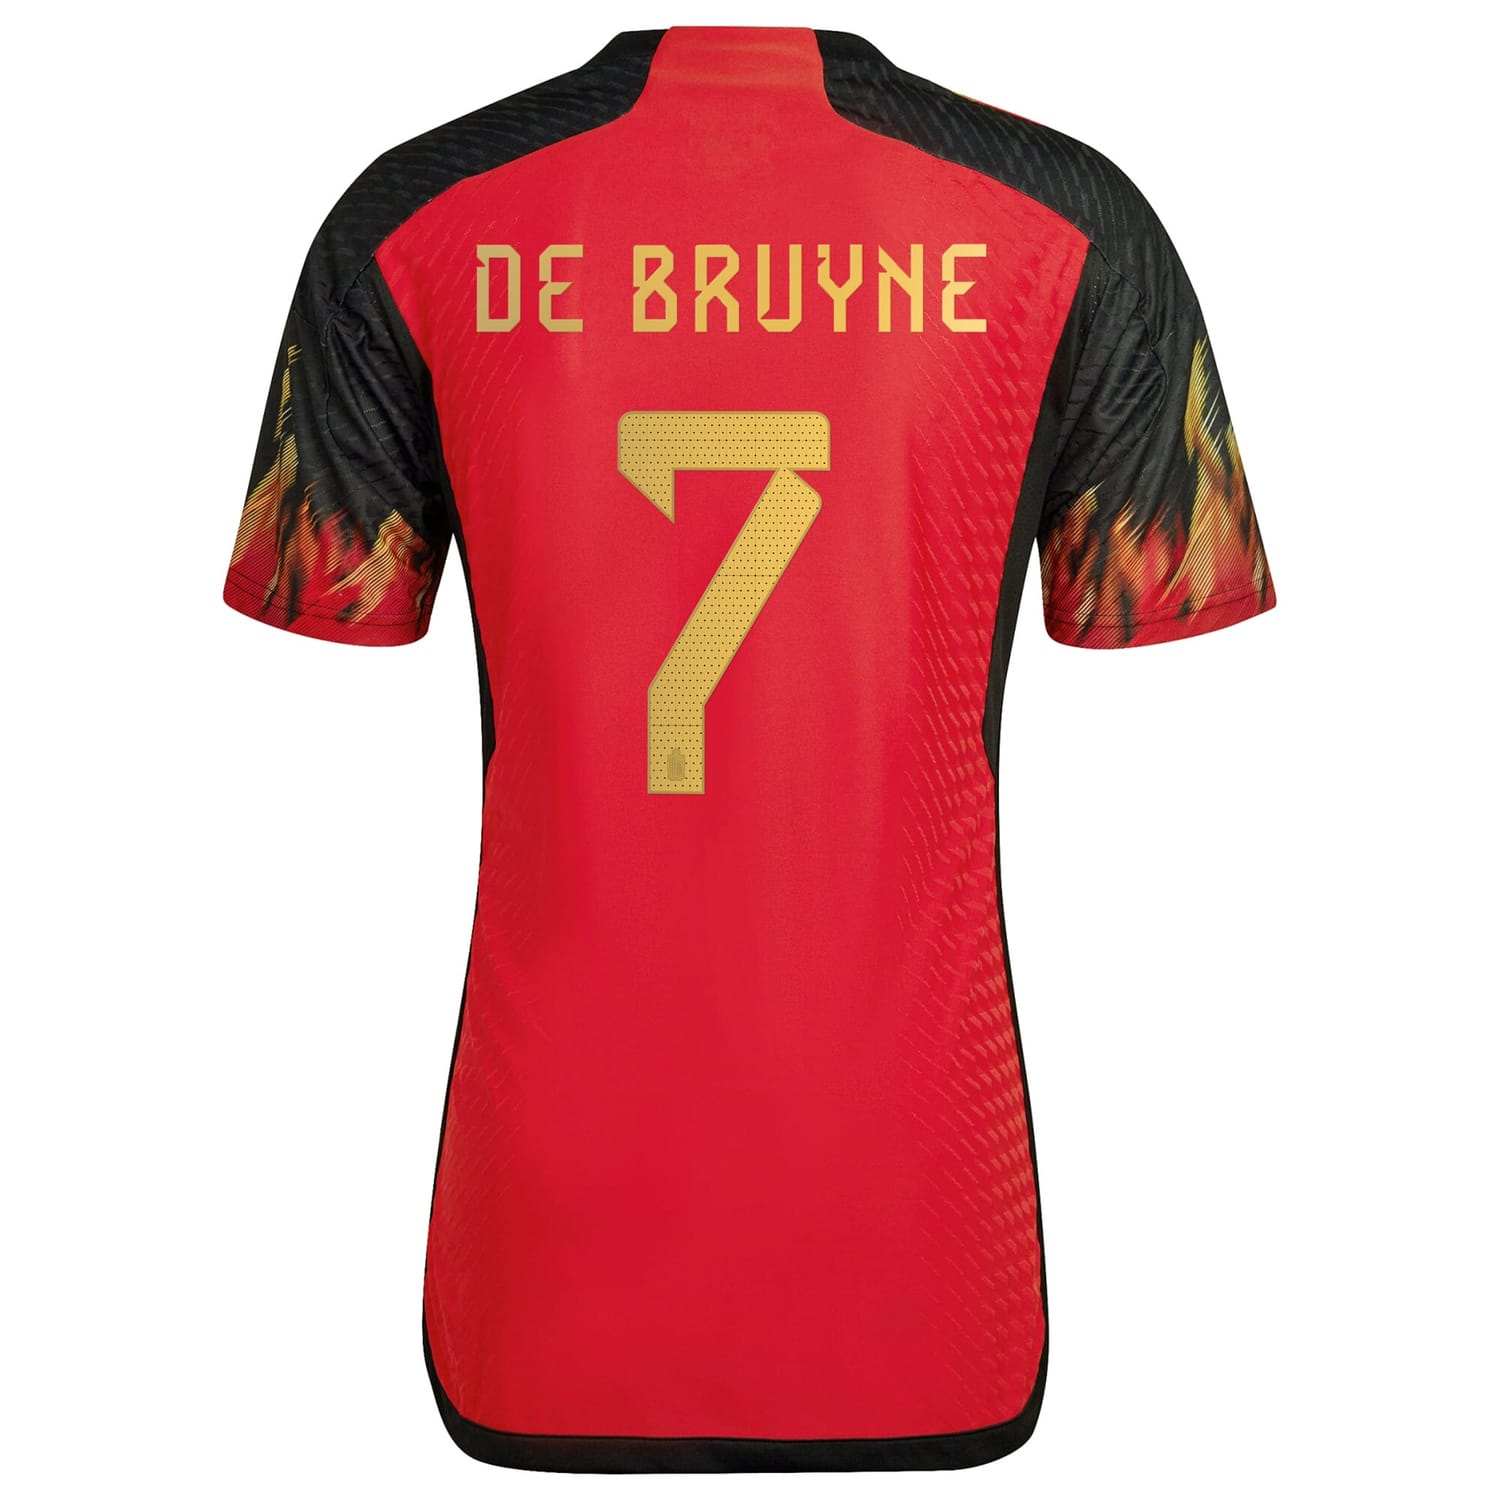 Belgium National Team Home Authentic Jersey Shirt Red 2022-23 player Kevin De Bruyne printing for Men